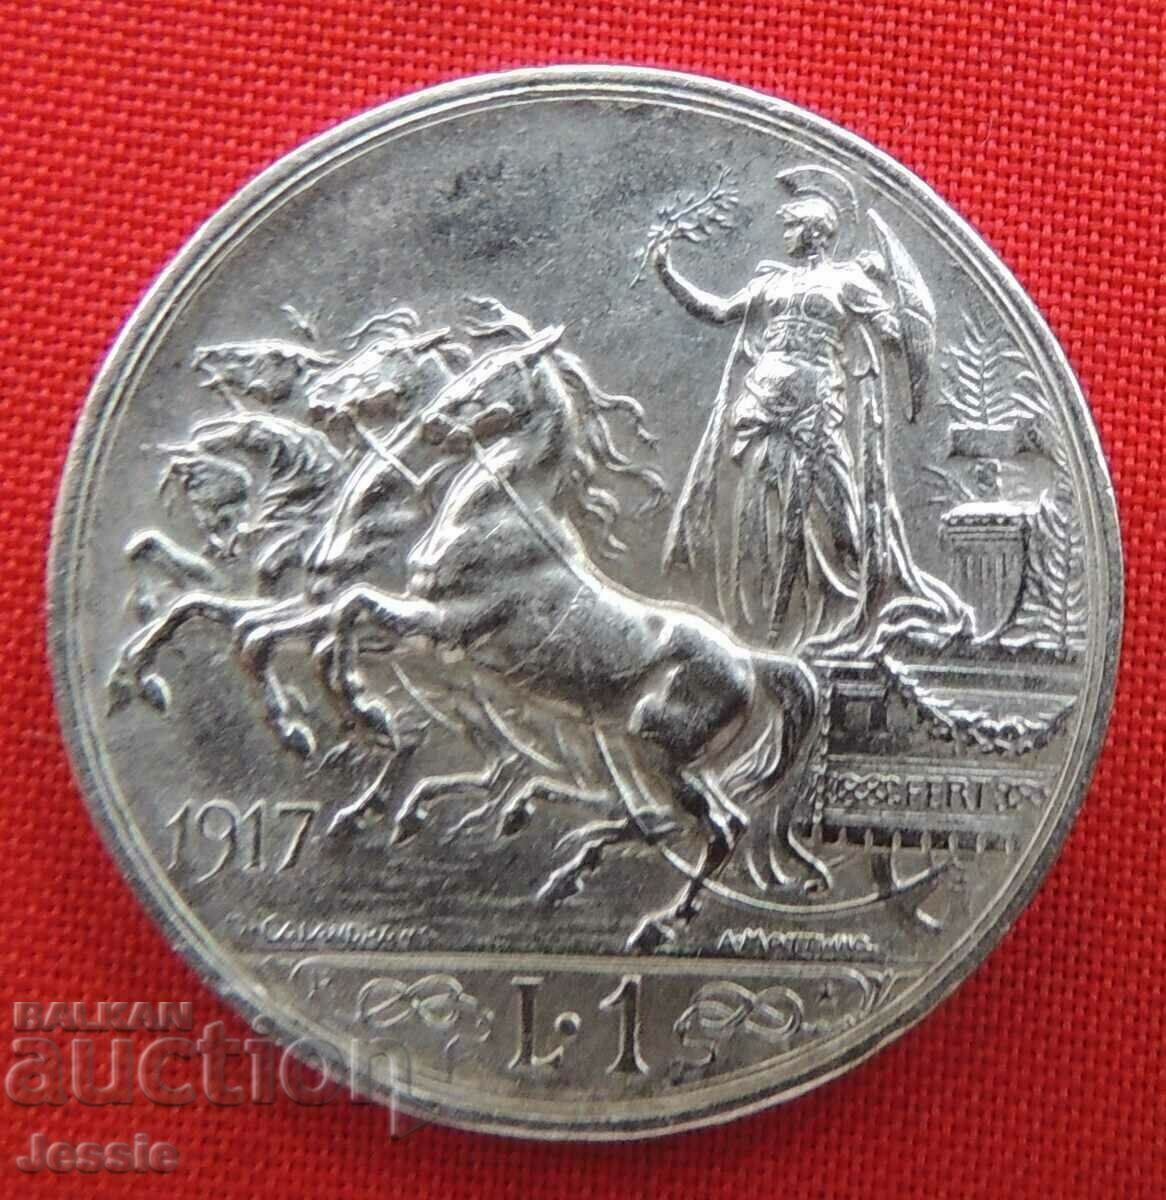 1 Lira 1917 R Italy silver Quality Compare and Rate!